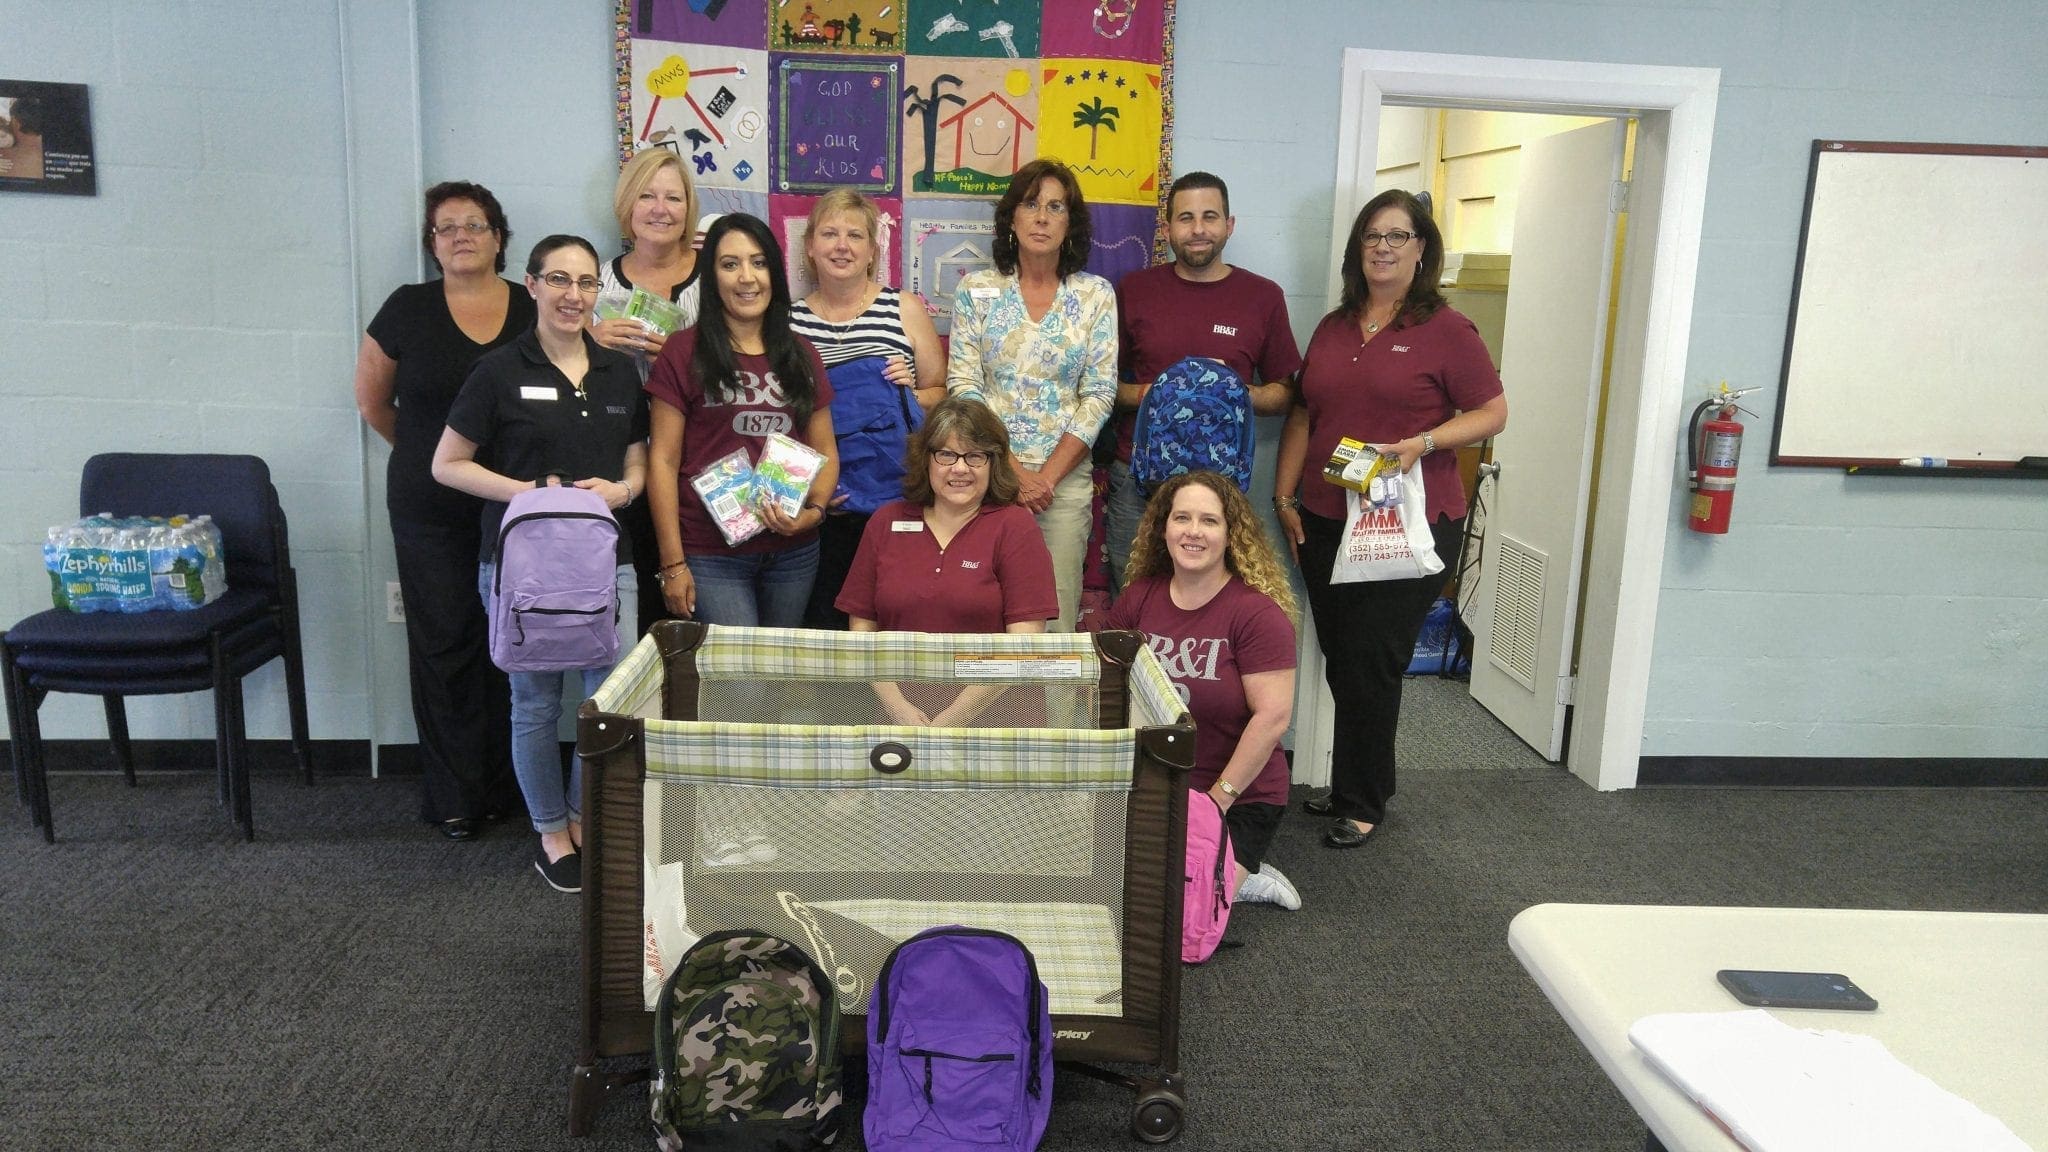 Pasco BB&T donates time and over $3,300 in items to Pasco Kids First